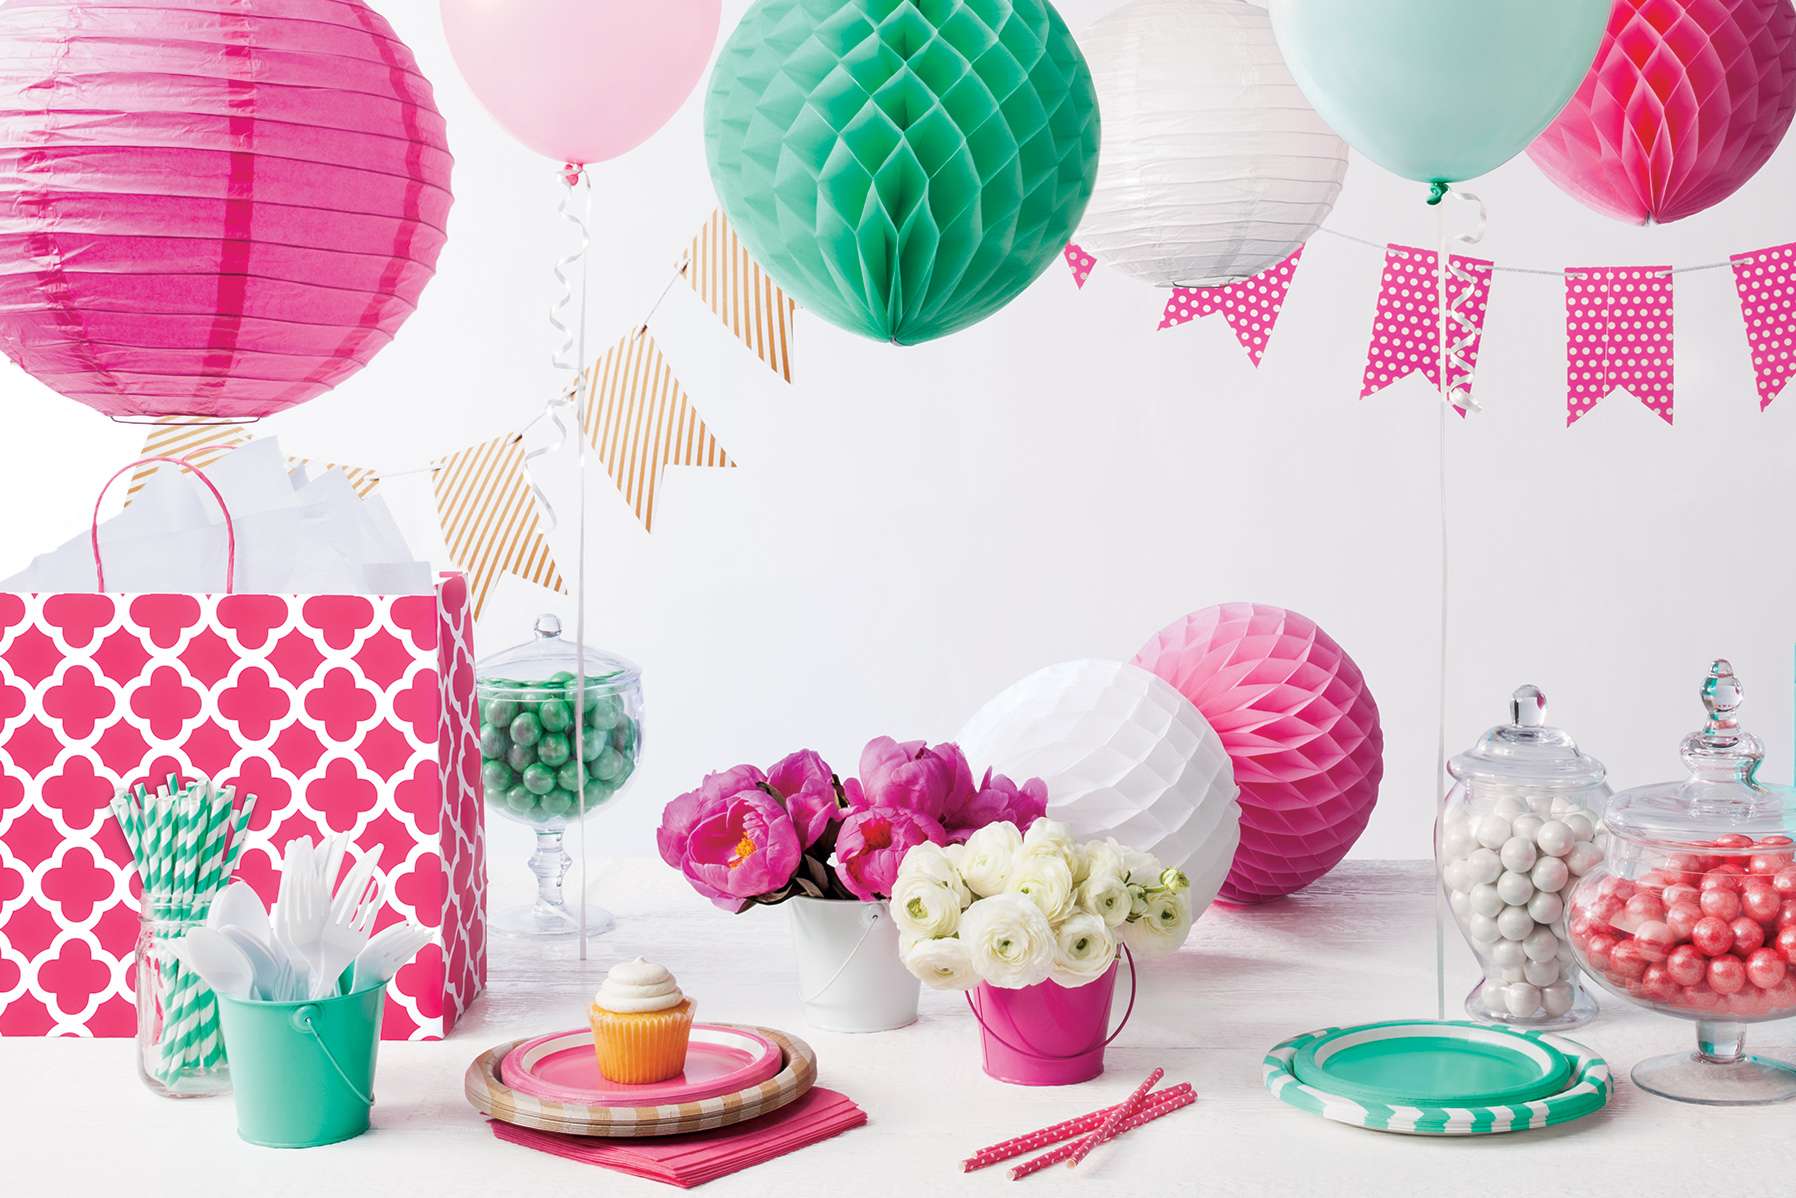  Target  Birthday  Party  Decorations  Decoratingspecial com